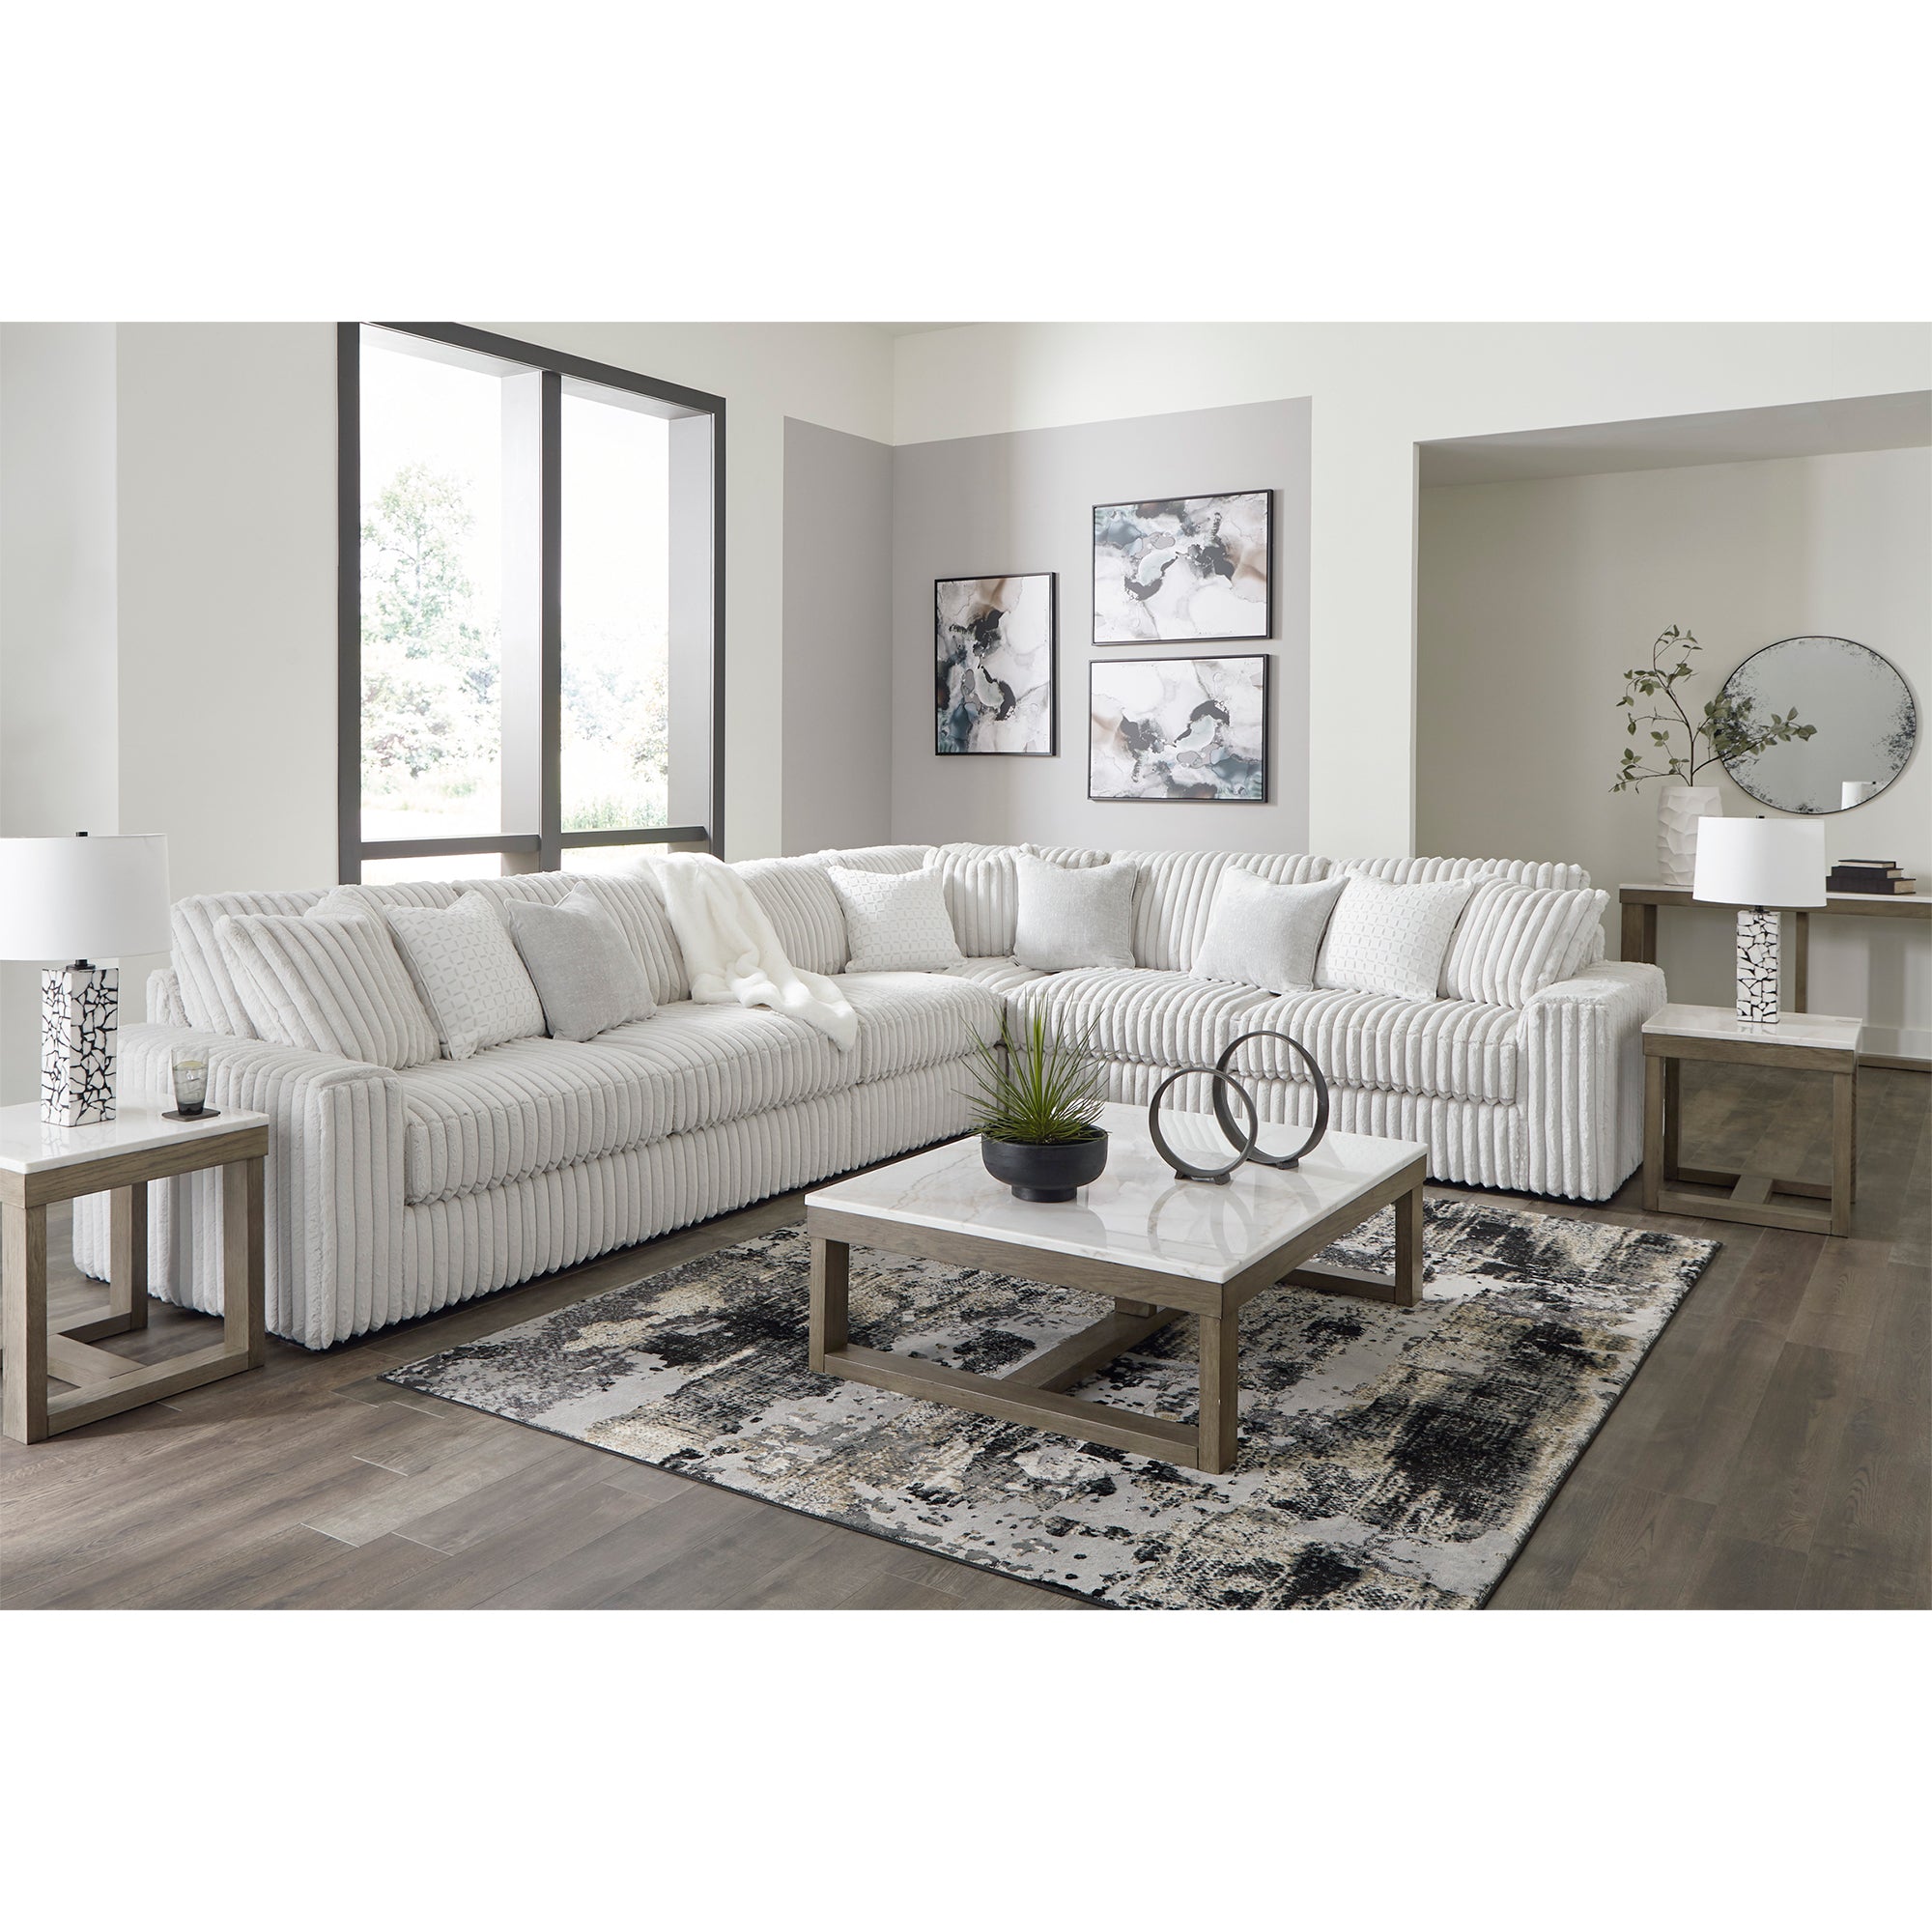 Luxurious Stupendous Sectional in four pieces, ideal for enhancing large living spaces with its bold character